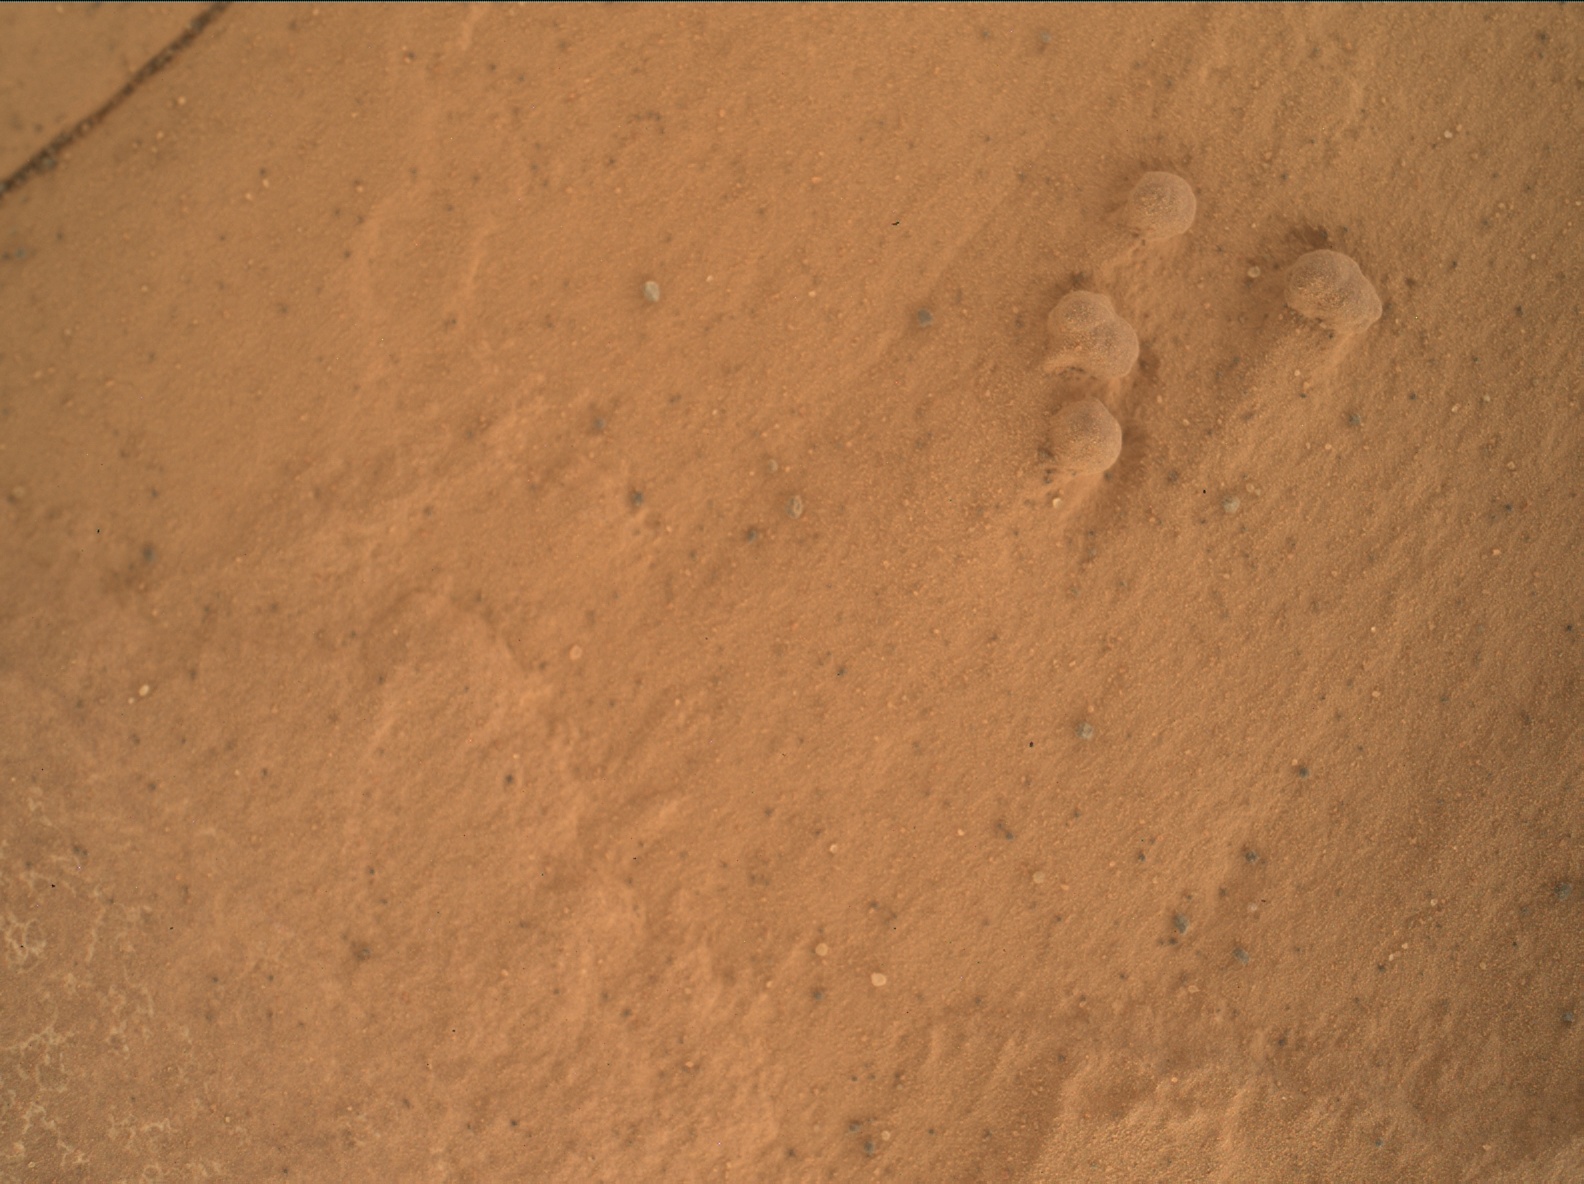 Nasa's Mars rover Curiosity acquired this image using its Mars Hand Lens Imager (MAHLI) on Sol 1786